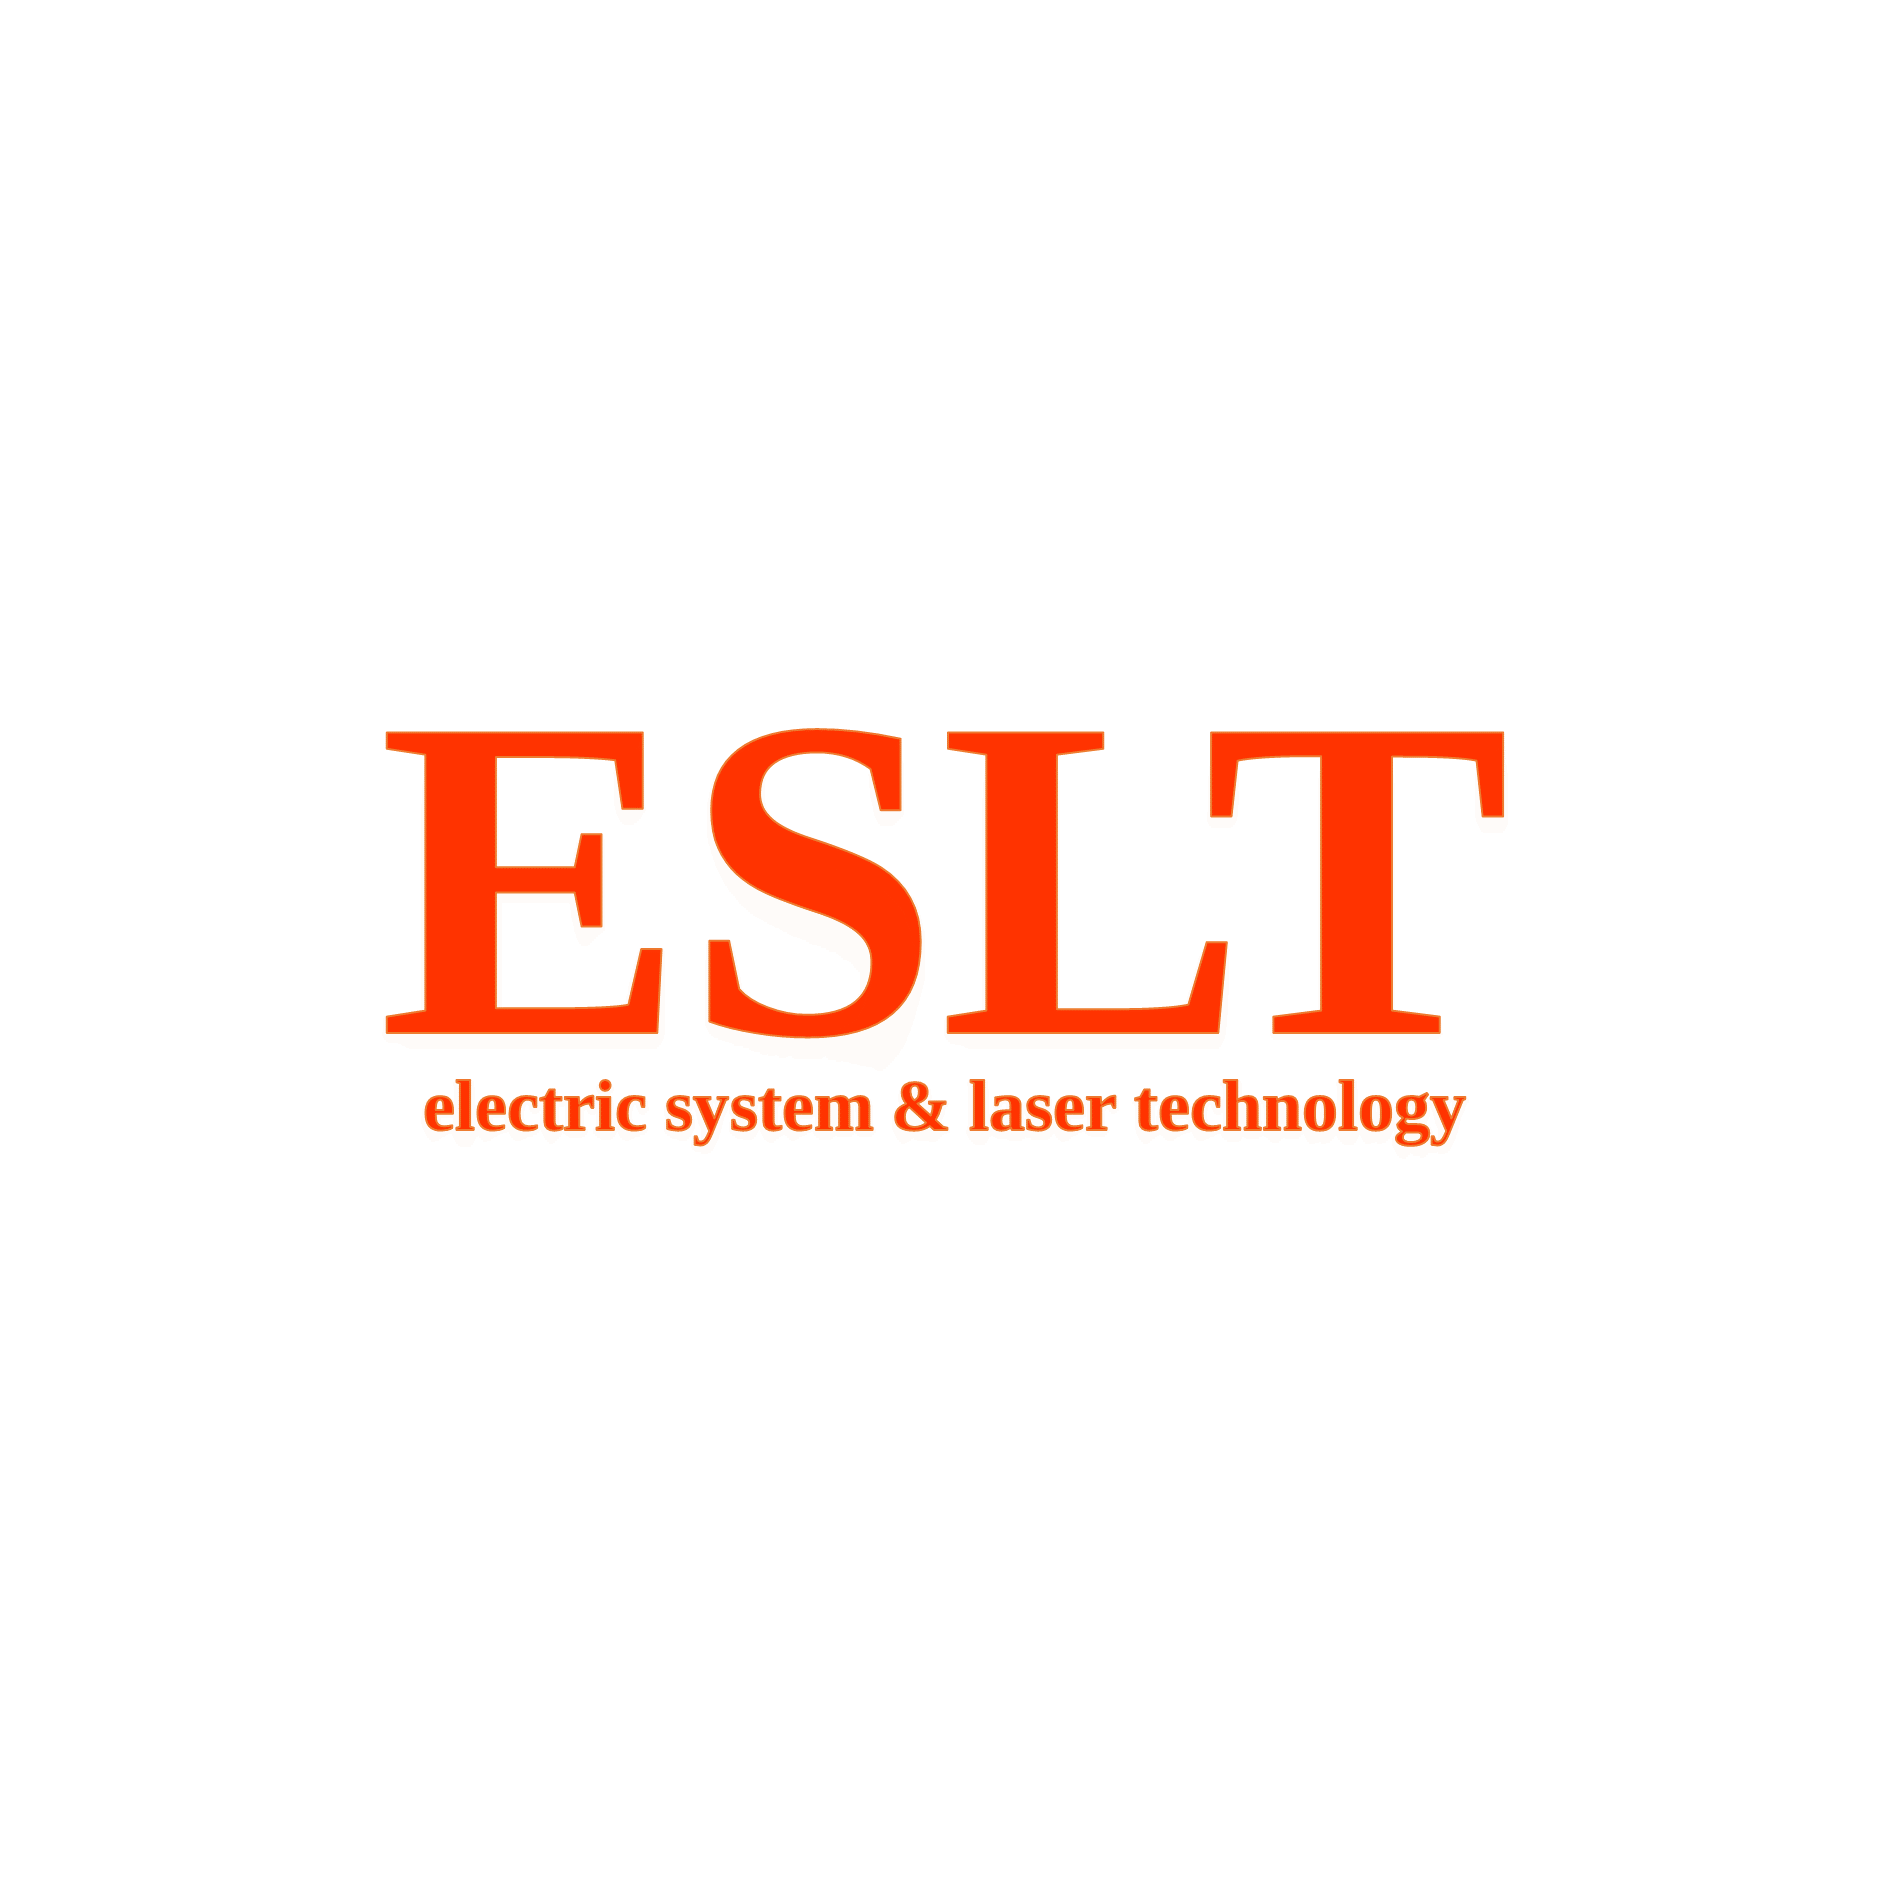 Electric System & Laser Technology